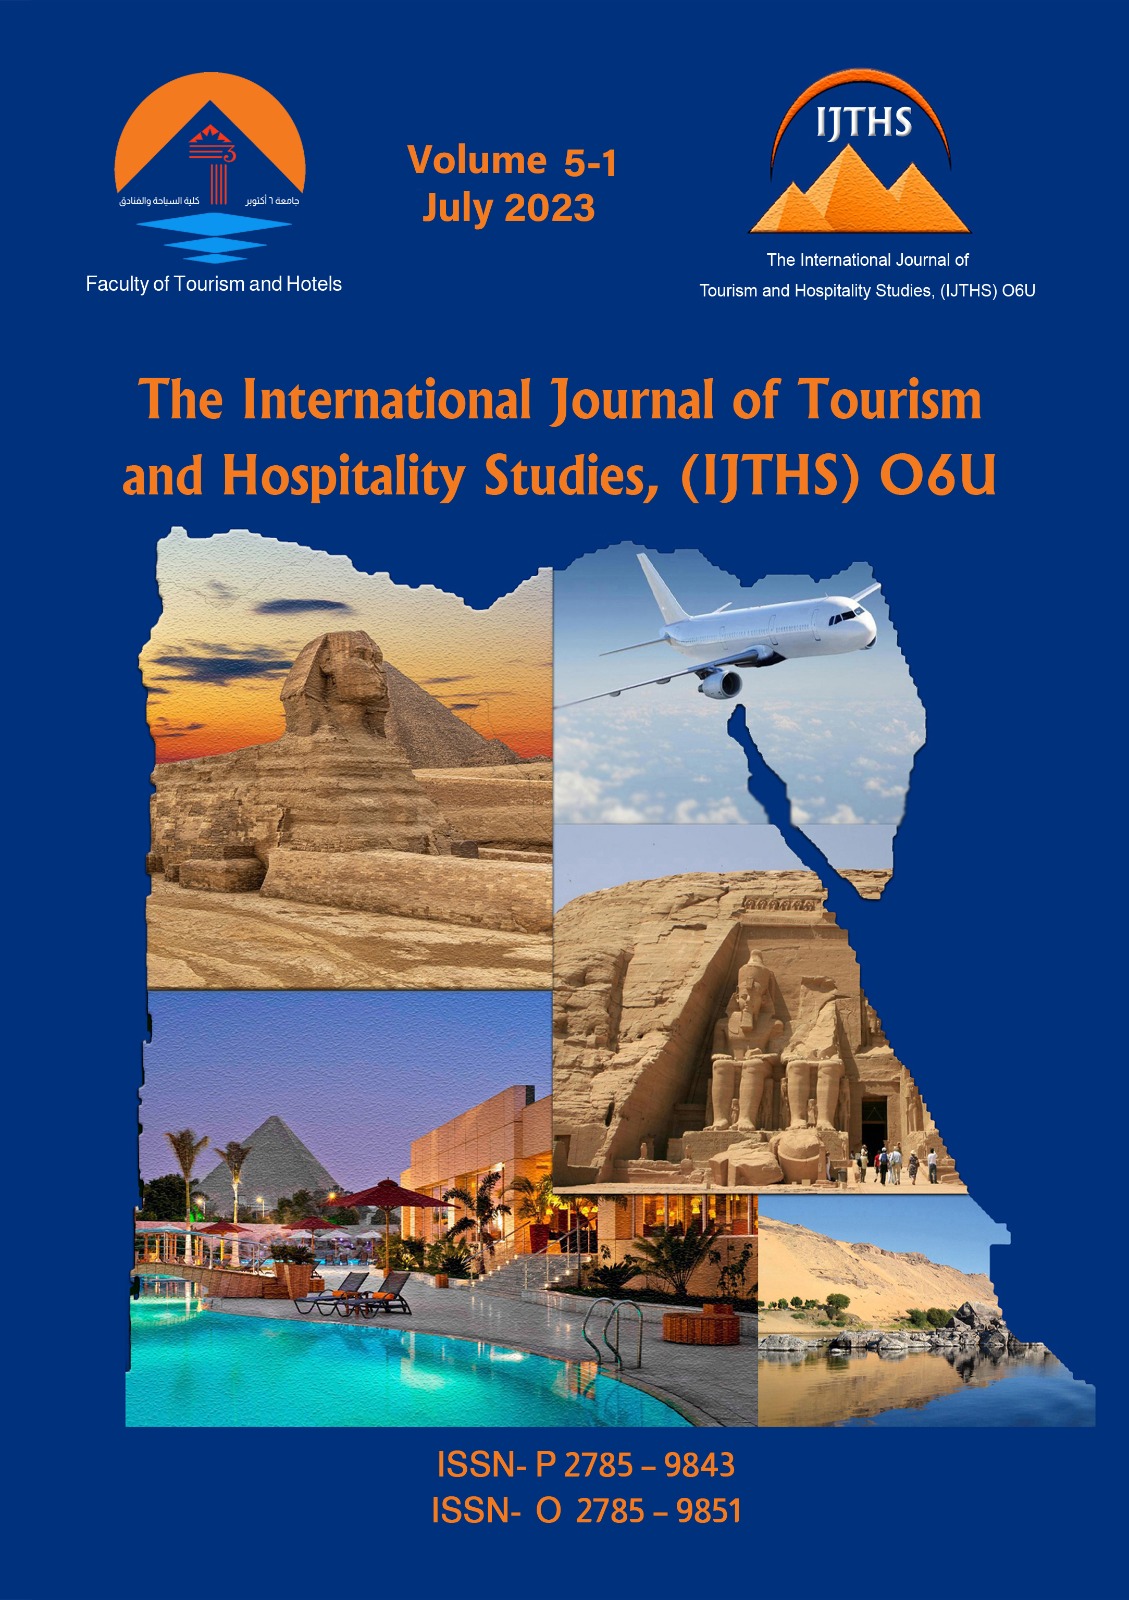 The International Journal of Tourism and Hospitality Studies